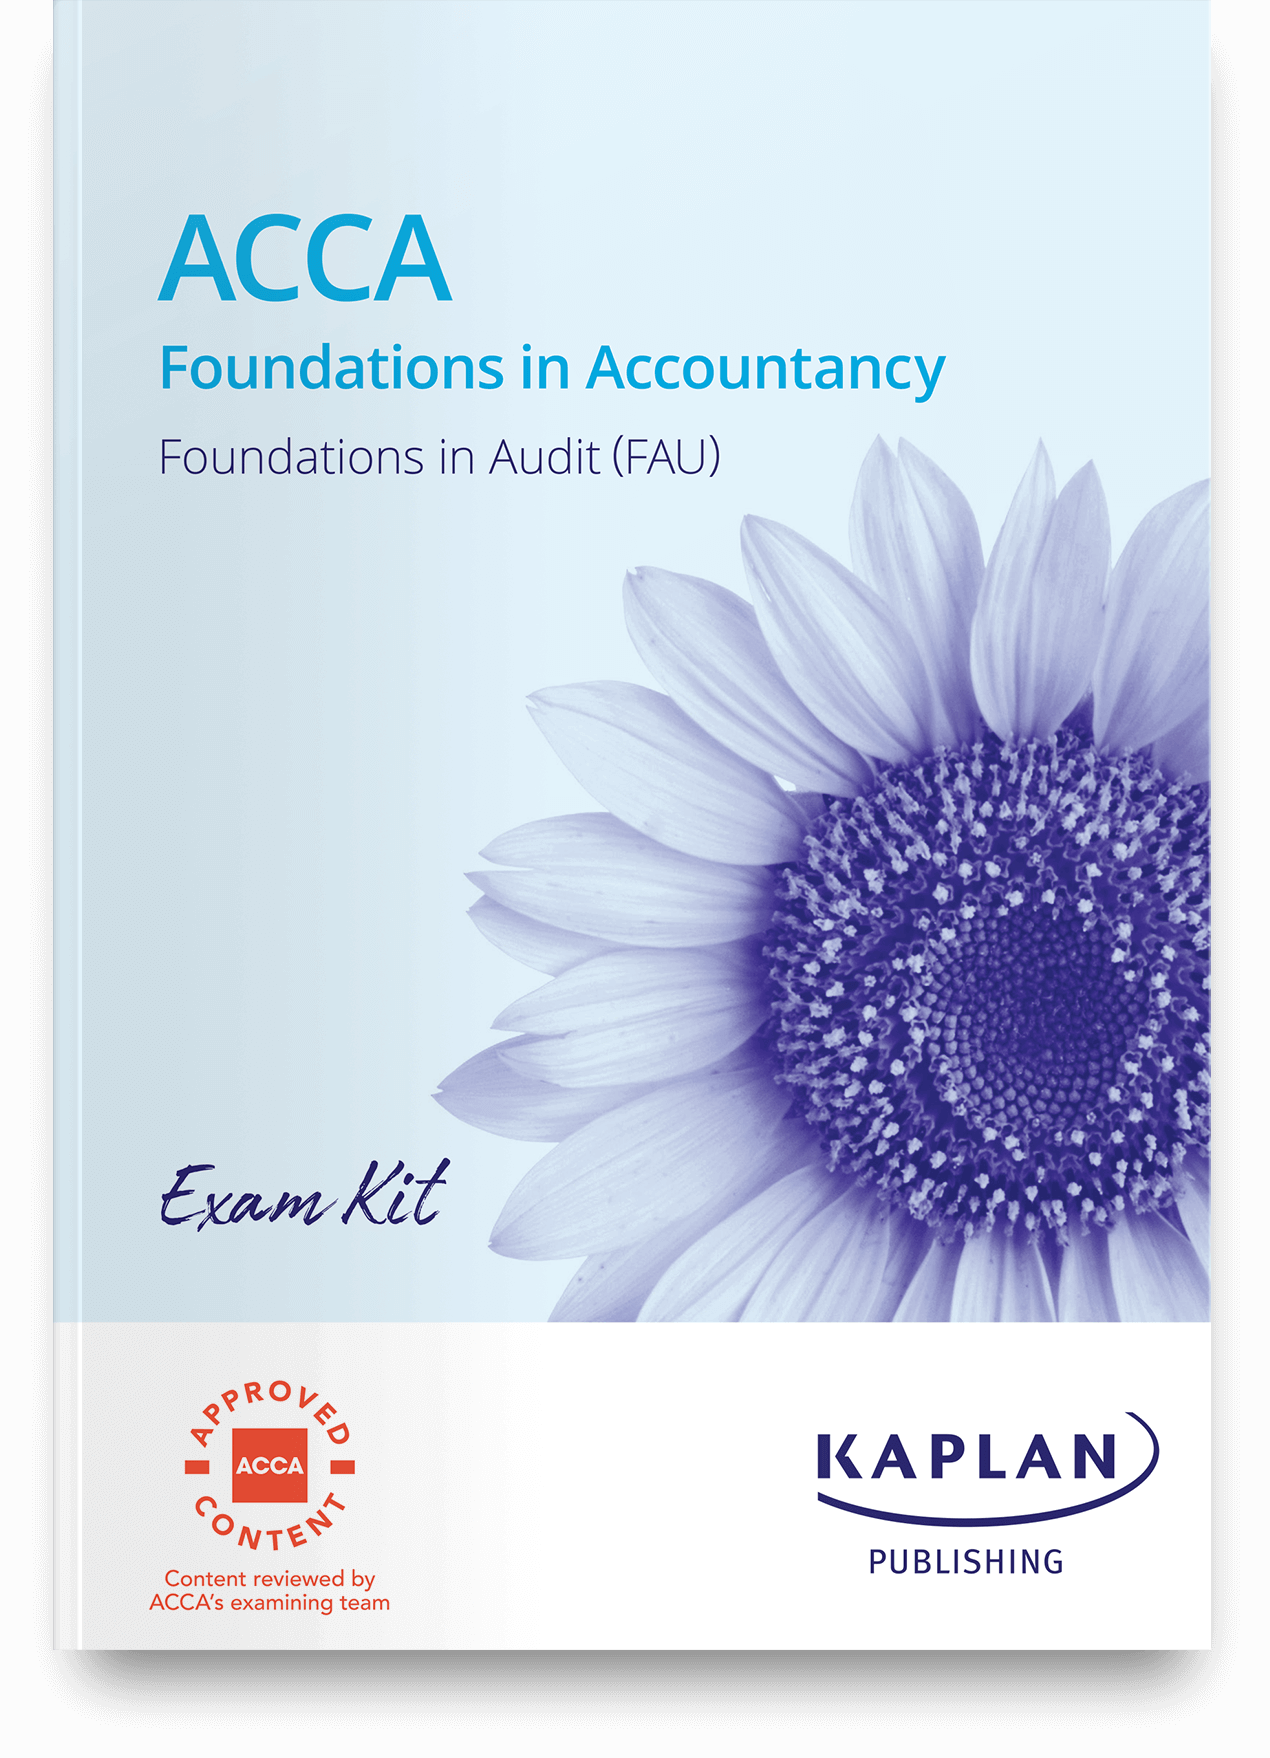 An image of the book for ACCA Foundations - Foundations in Audit (FAU) - Exam Kit